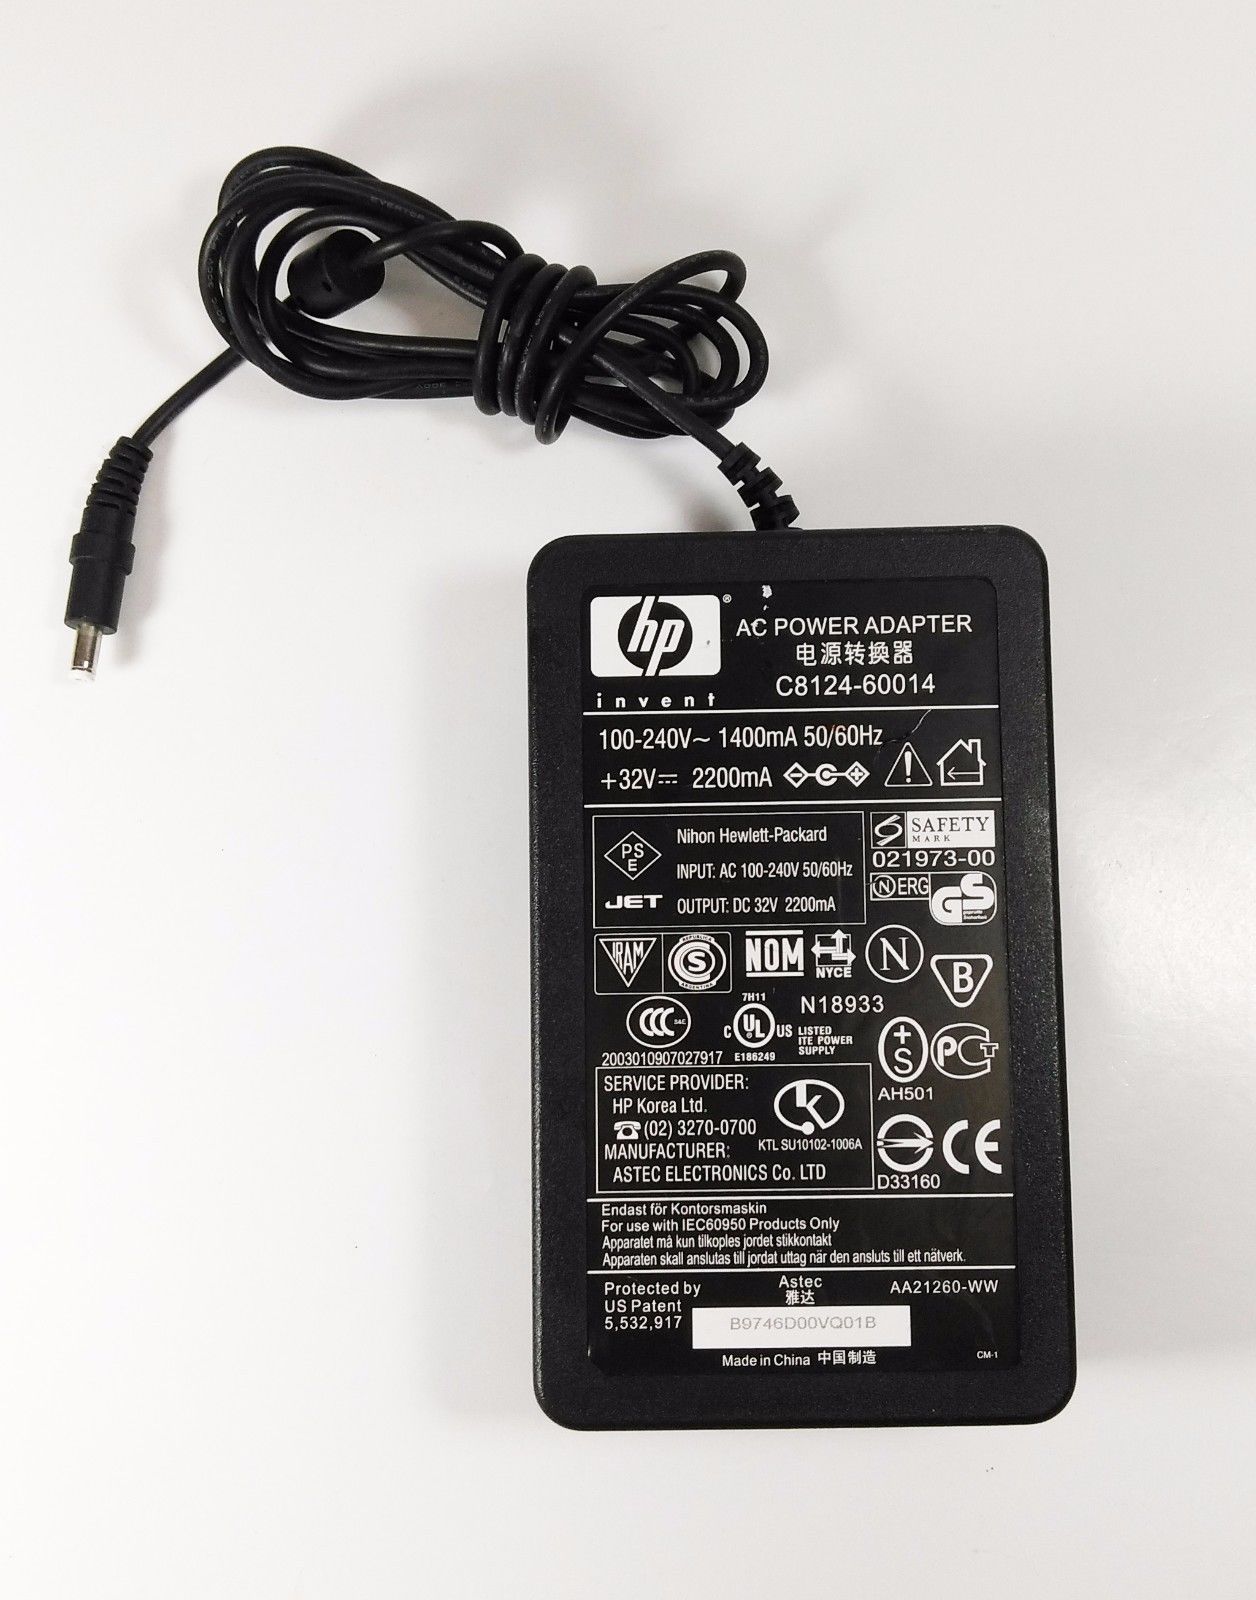 32V 2200mA 70W HP DeskJet C8995A Printer AC Power Adapter Charger